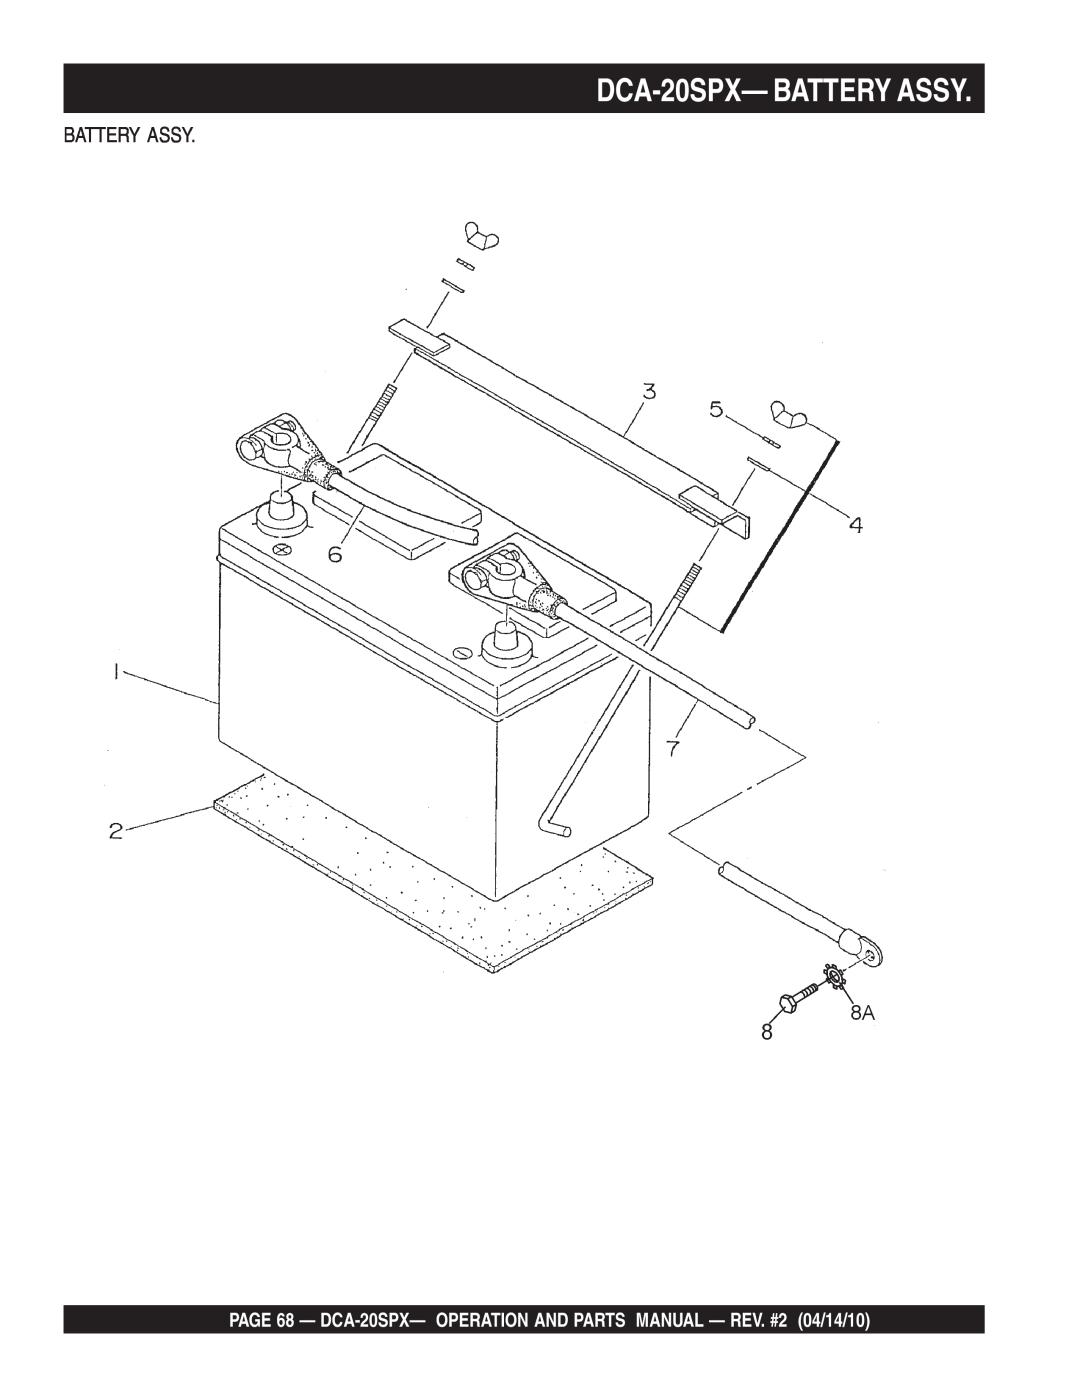 Multiquip DCA-20SPX- BATTERY ASSY, Battery Assy, PAGE 68 - DCA-20SPX- OPERATION AND PARTS MANUAL - REV. #2 04/14/10 